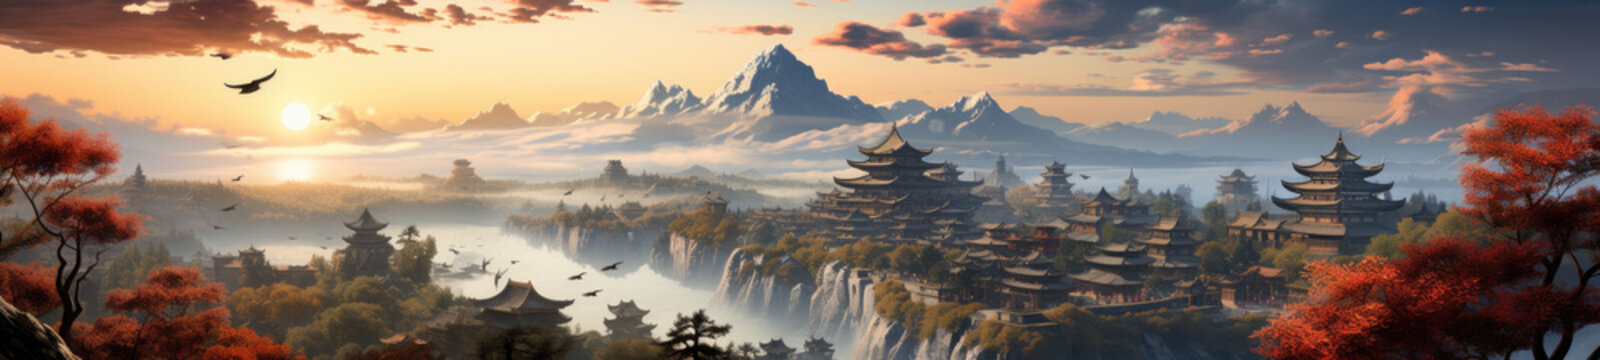 The mountains host Chinese ancient architecture, where the past and nature intertwine, creating a serene and picturesque scene.